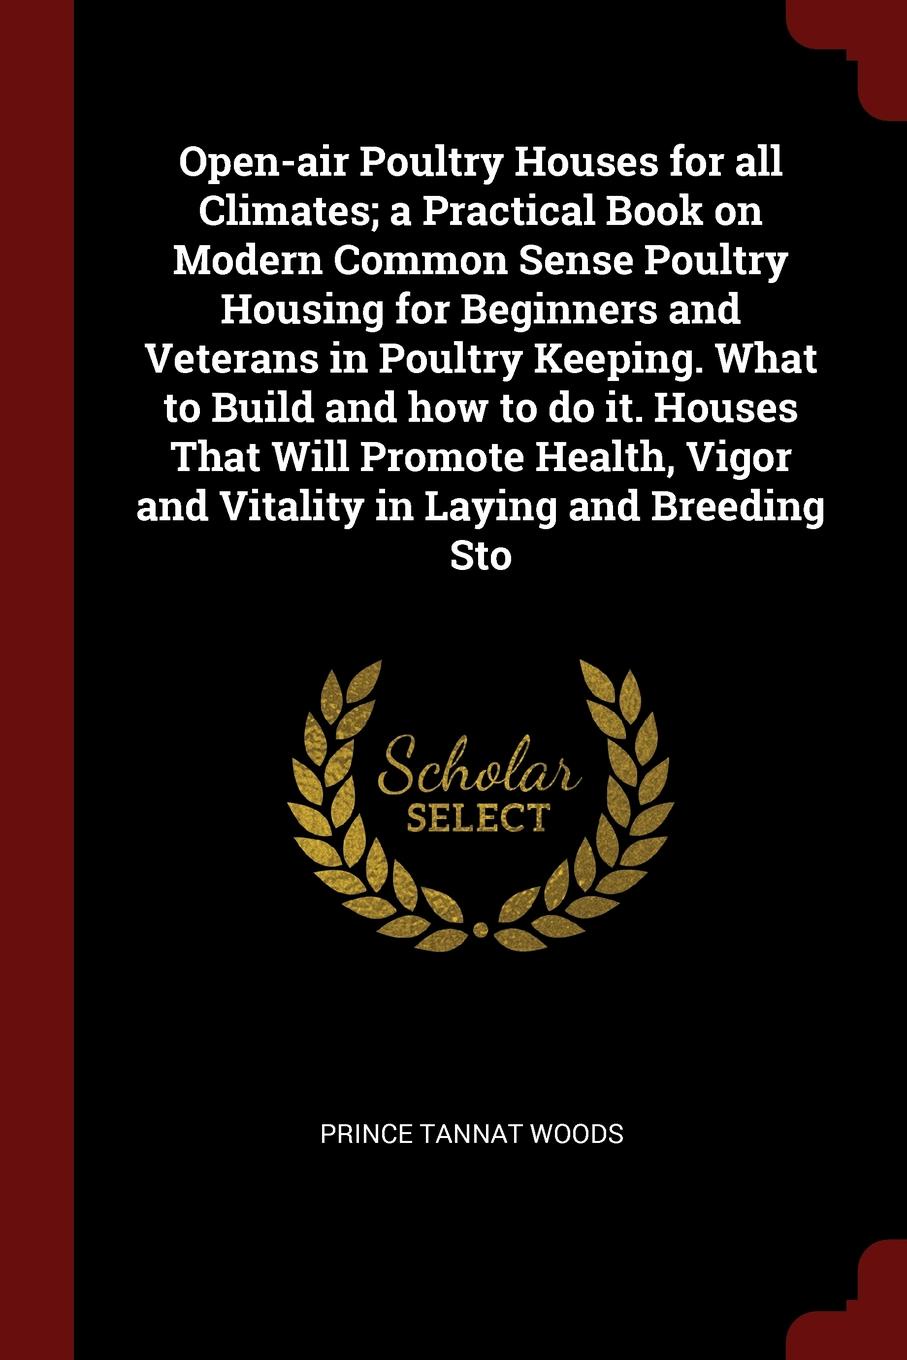 Open-air Poultry Houses for all Climates; a Practical Book on Modern Common Sense Poultry Housing for Beginners and Veterans in Poultry Keeping. What to Build and how to do it. Houses That Will Promote Health, Vigor and Vitality in Laying and Bree...